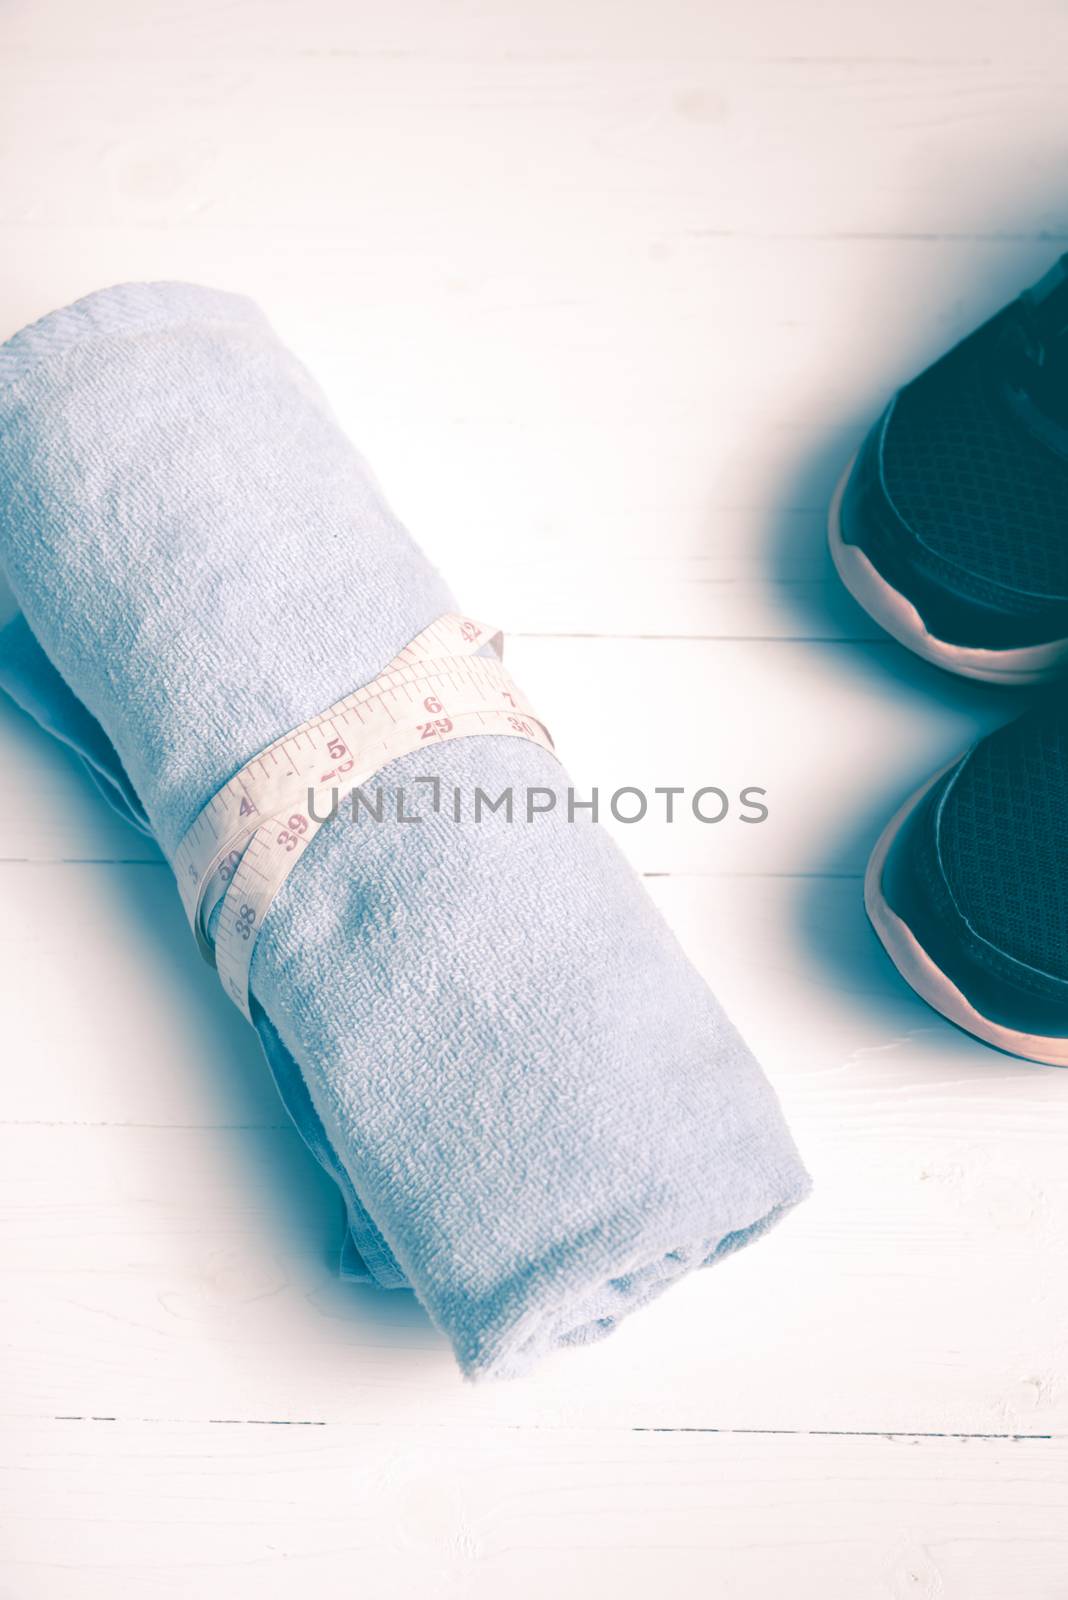 fitness equipment : running shoes,blue towel and measuring tape on white wood table vintage style